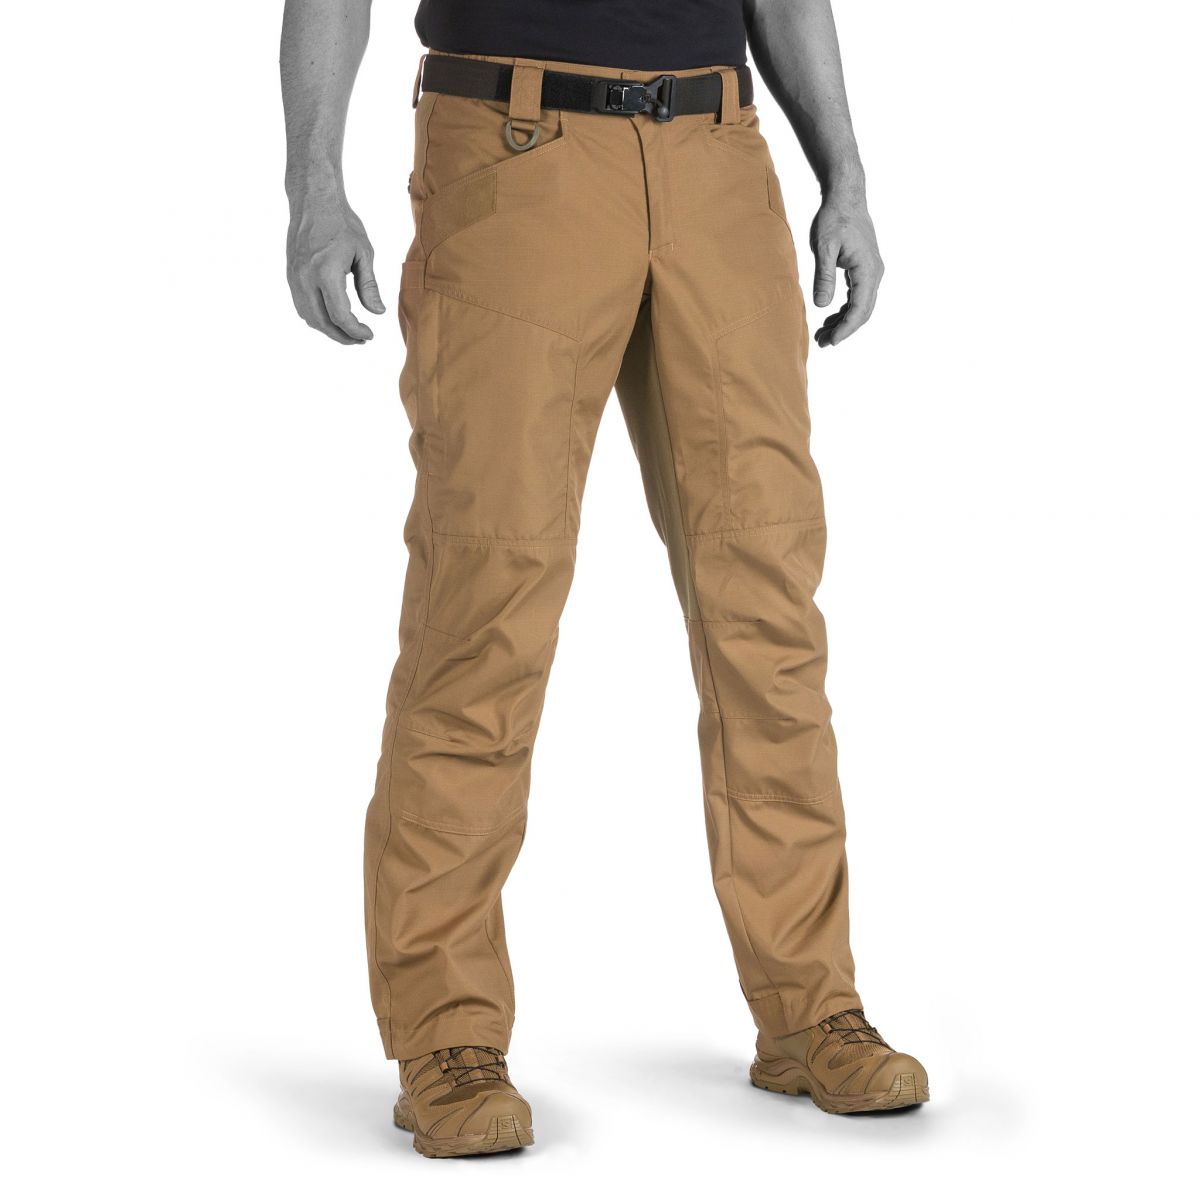 P 40 Urban Tactical Pants Go To Pair For Urban Ops Uf Pro